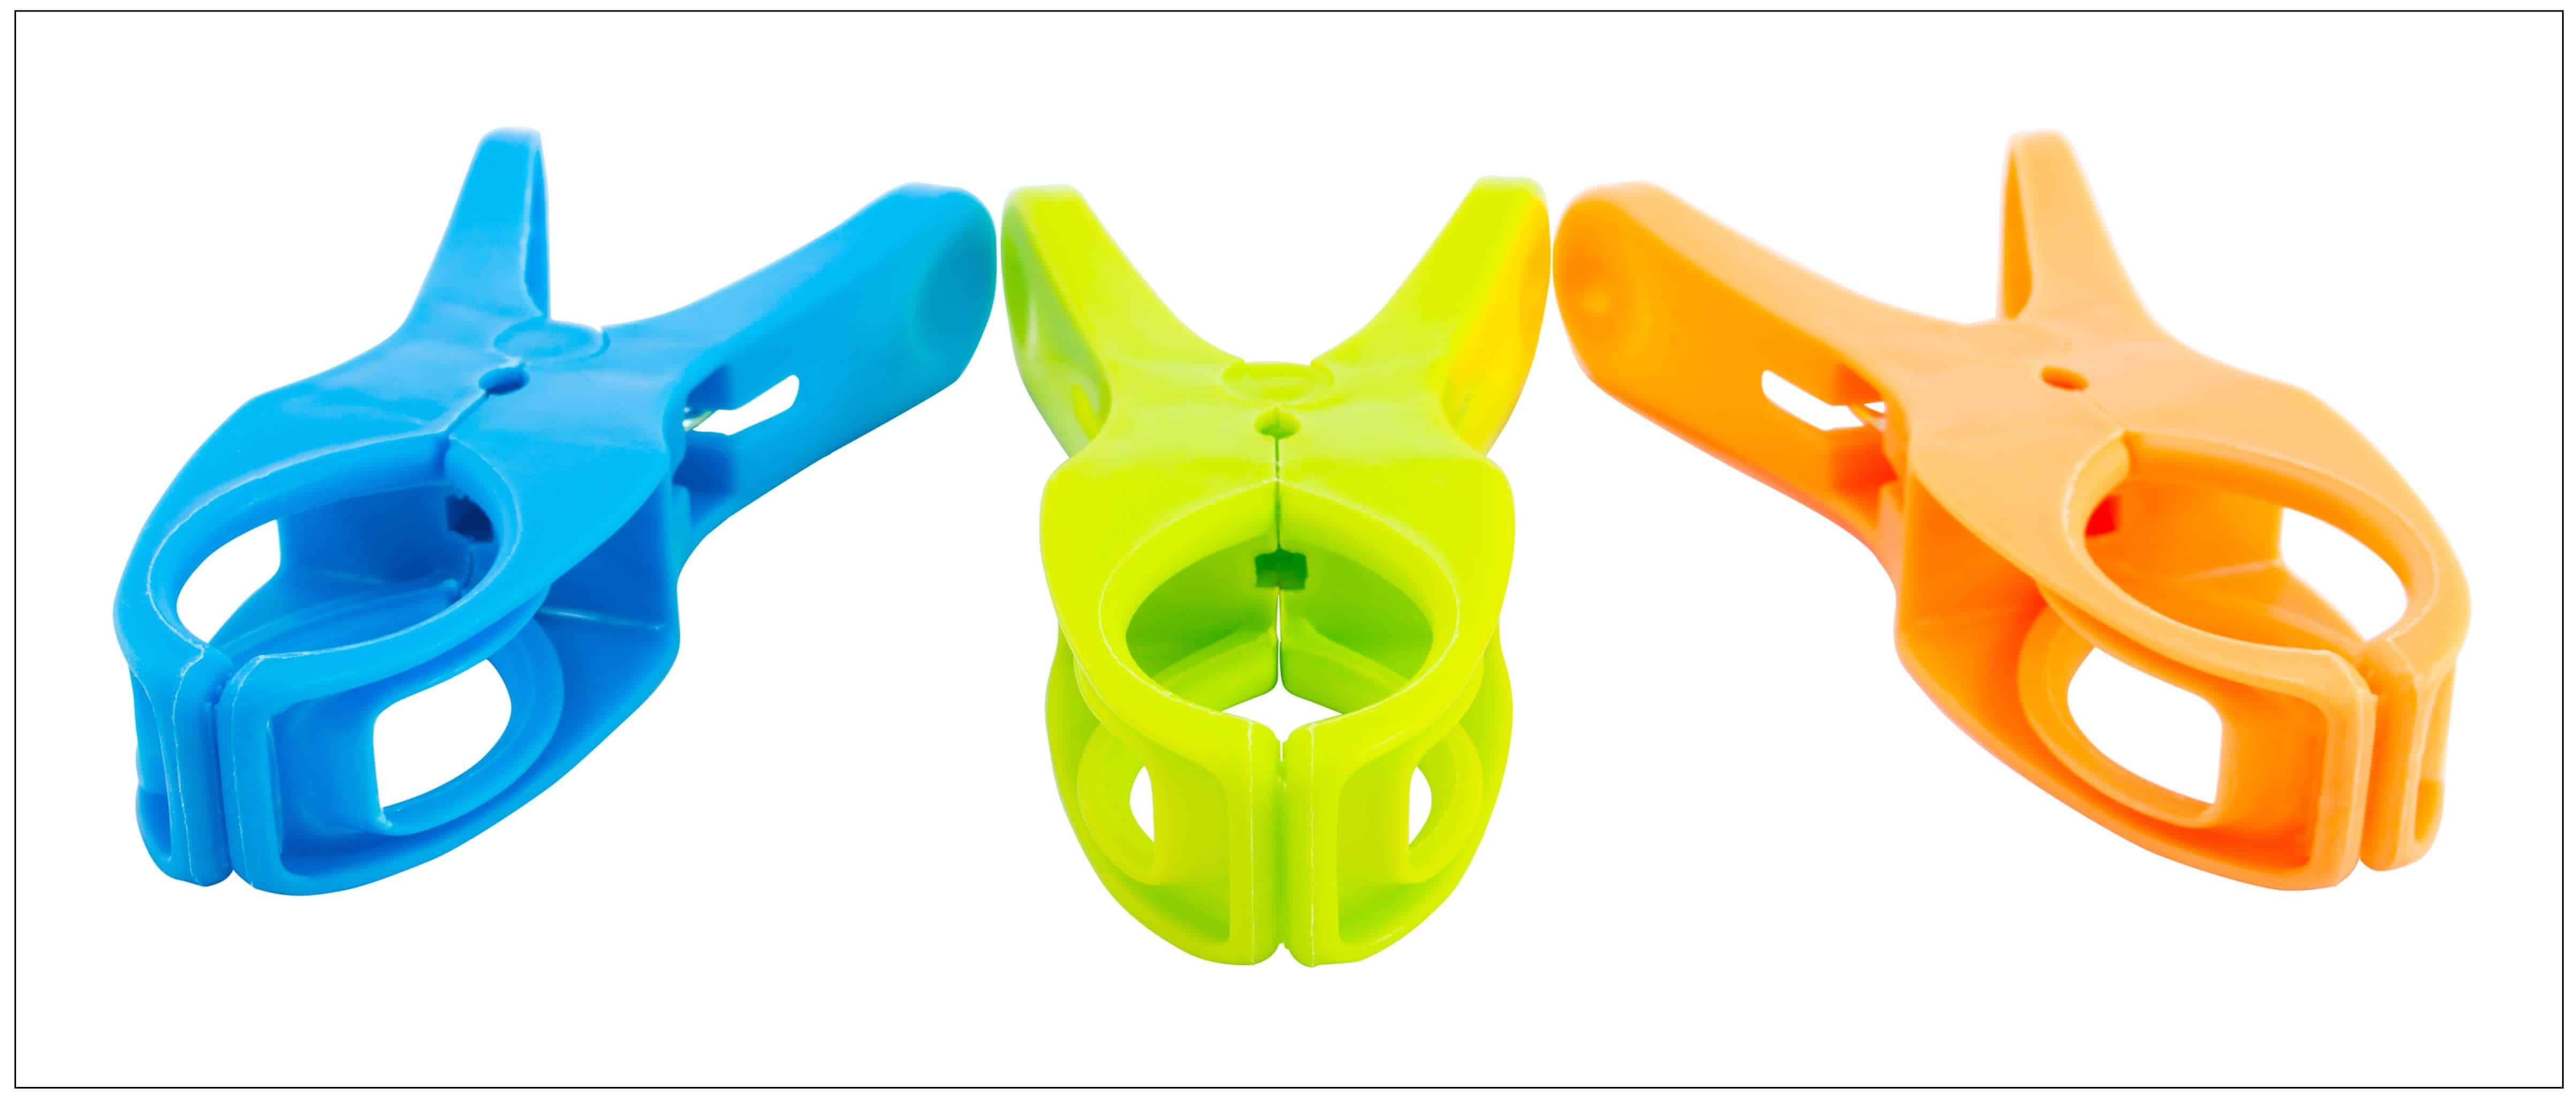 Three plastic spring clamps isolated over white background - ICOMold®